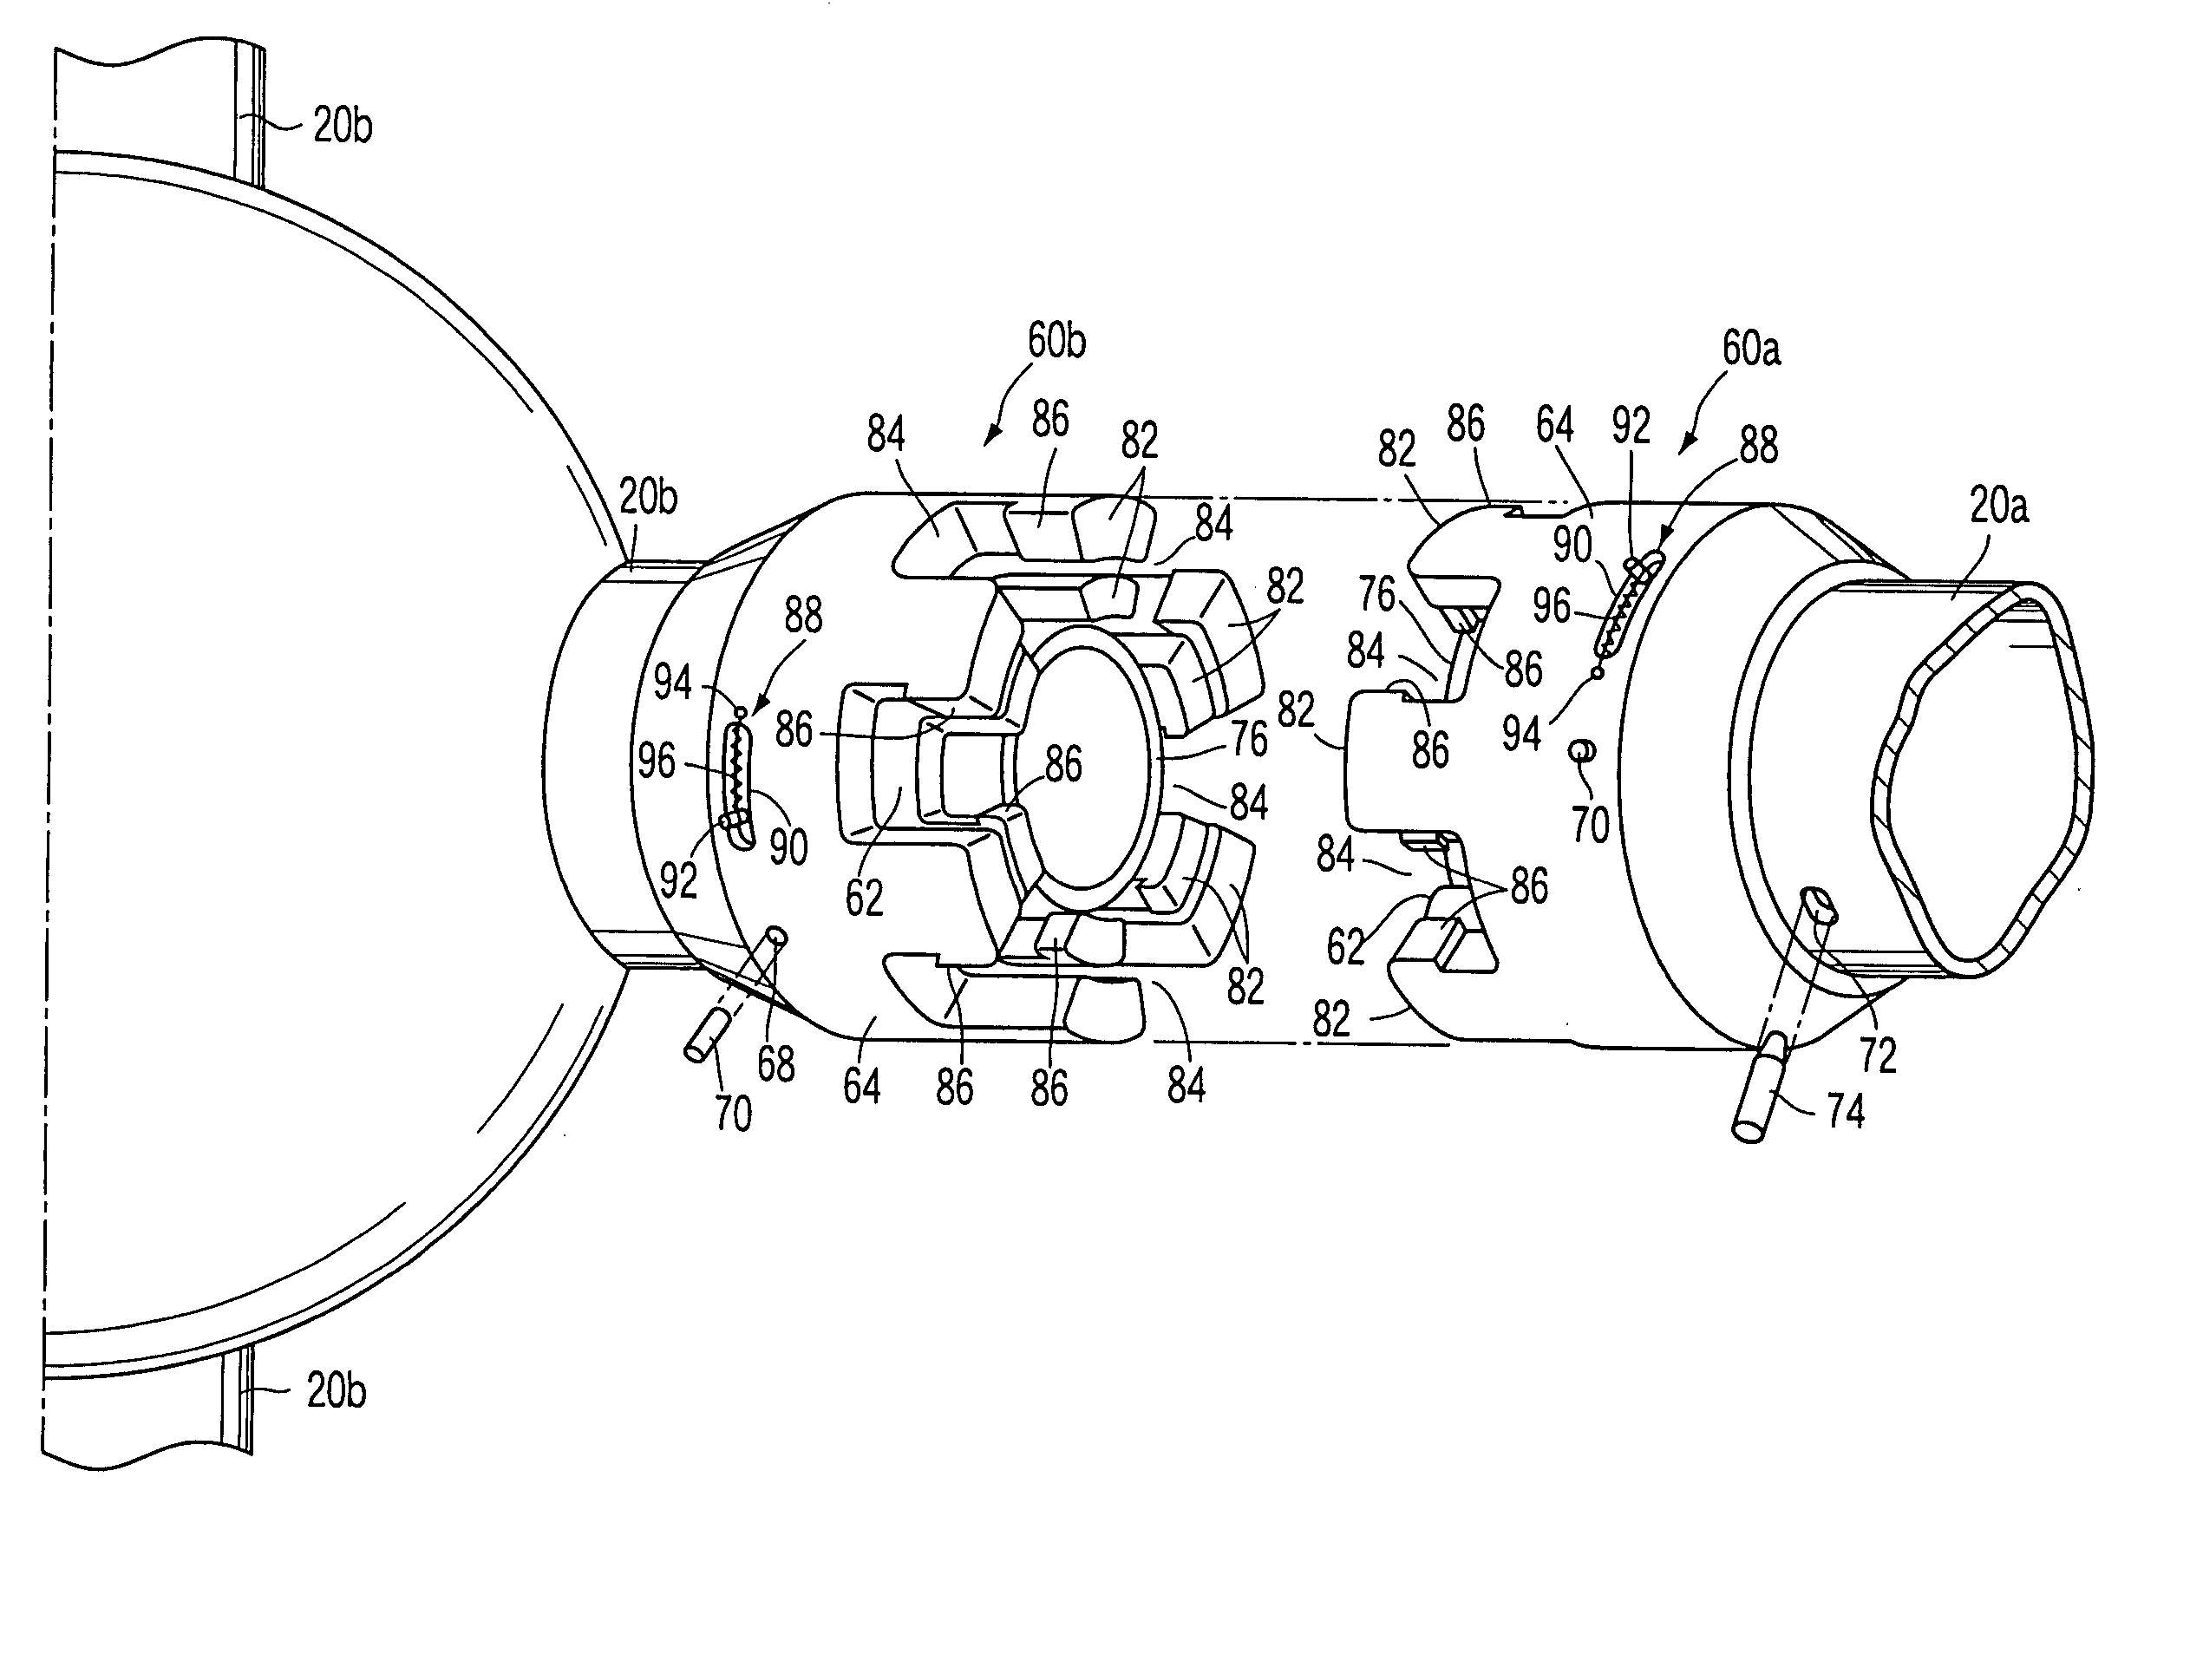 Coupling apparatus for structural members